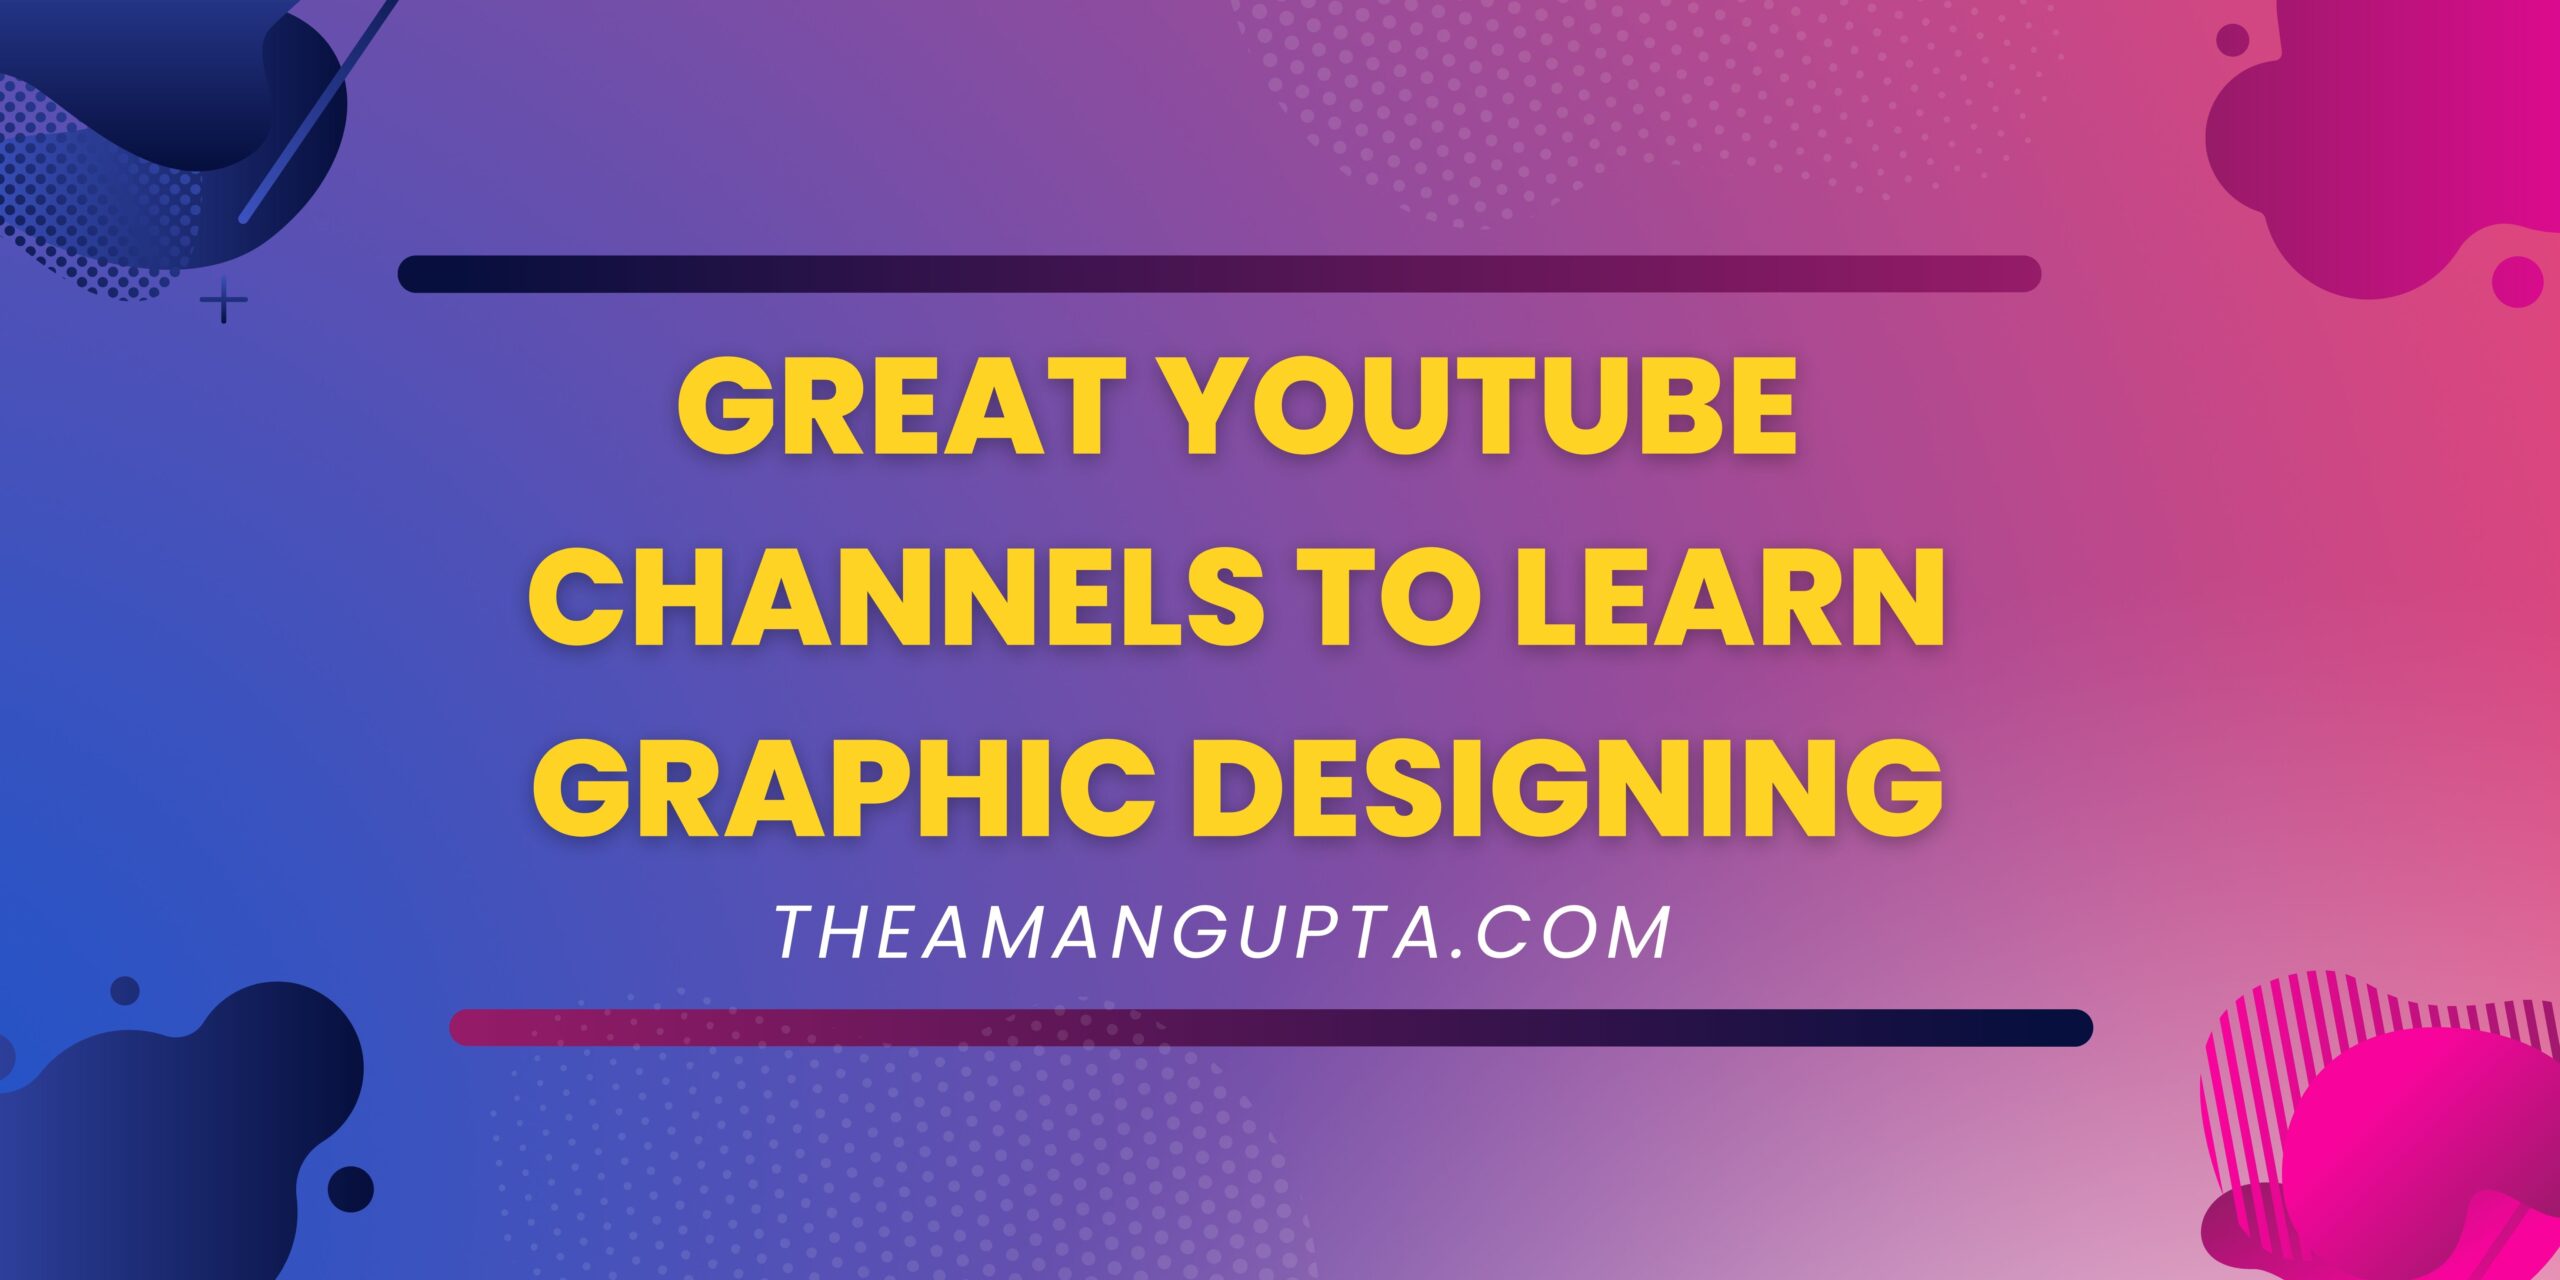 Great YouTube Channels to Learn Graphic Design from|Graphic Design|Theamangupta|Theamangupta